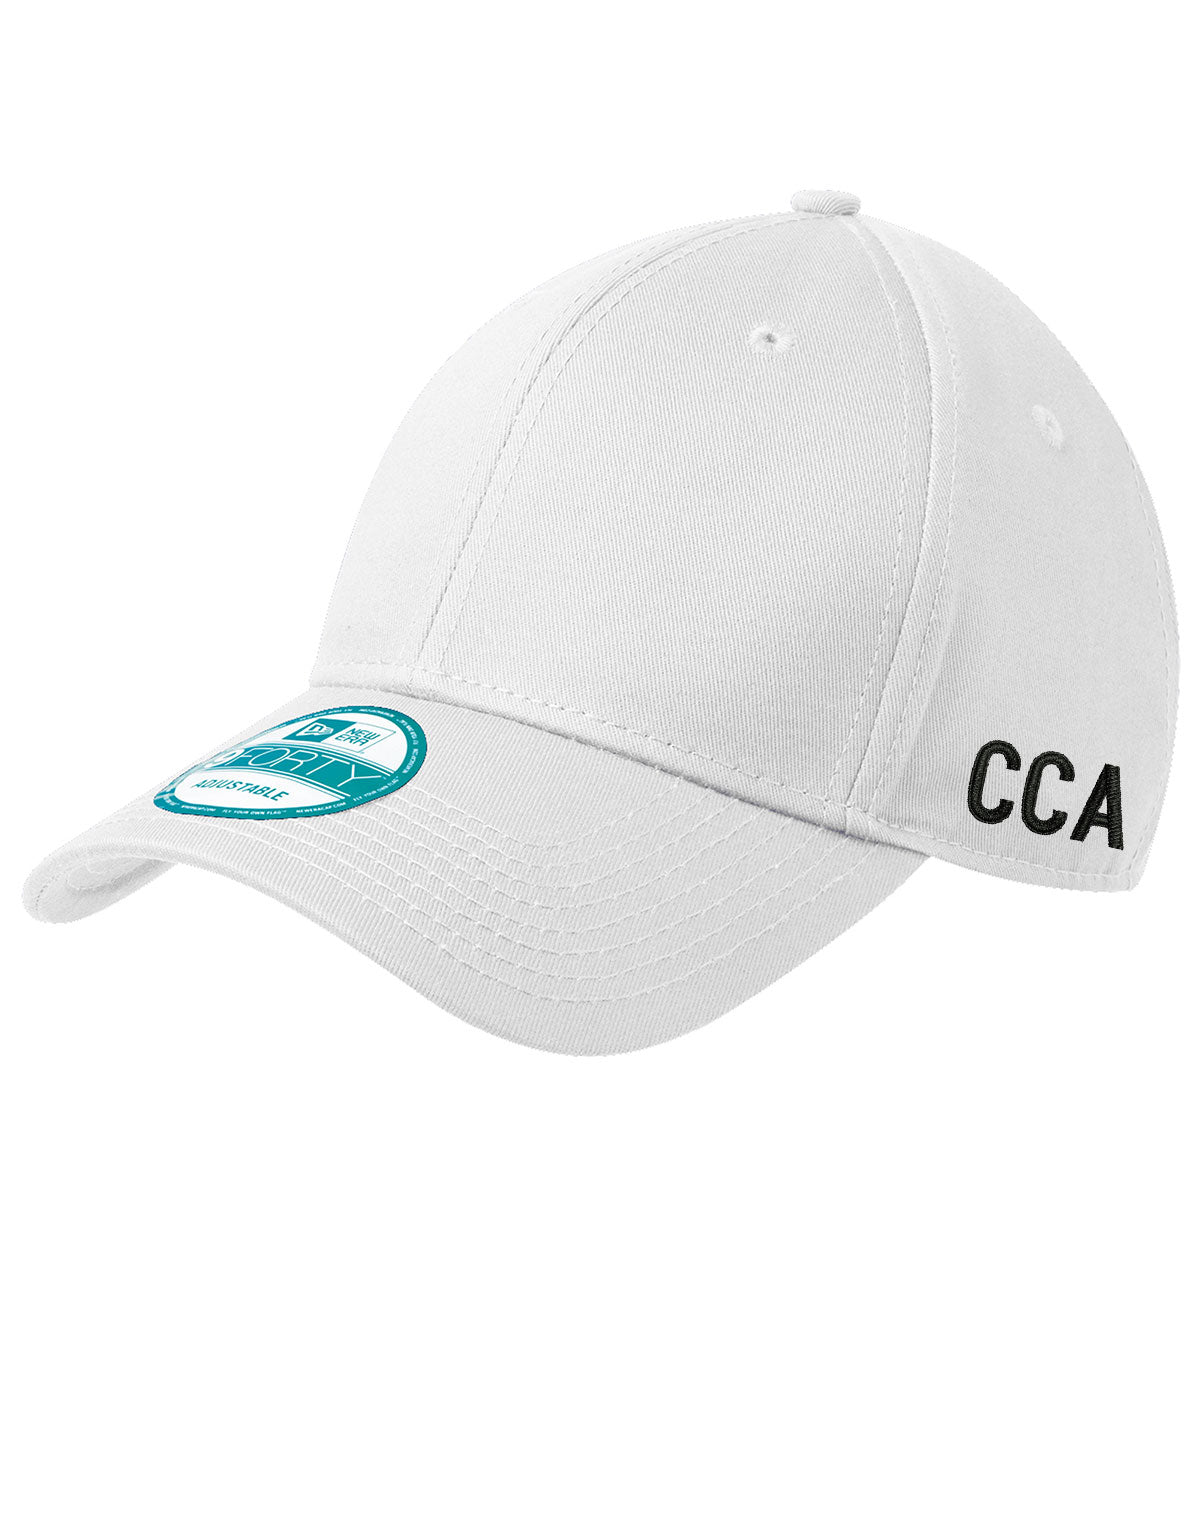 GOLF® Unisex Cap - God Offered Love First® Embroidered New Era Cap® One Size Fits Most Adults - COATES Christian Apparel